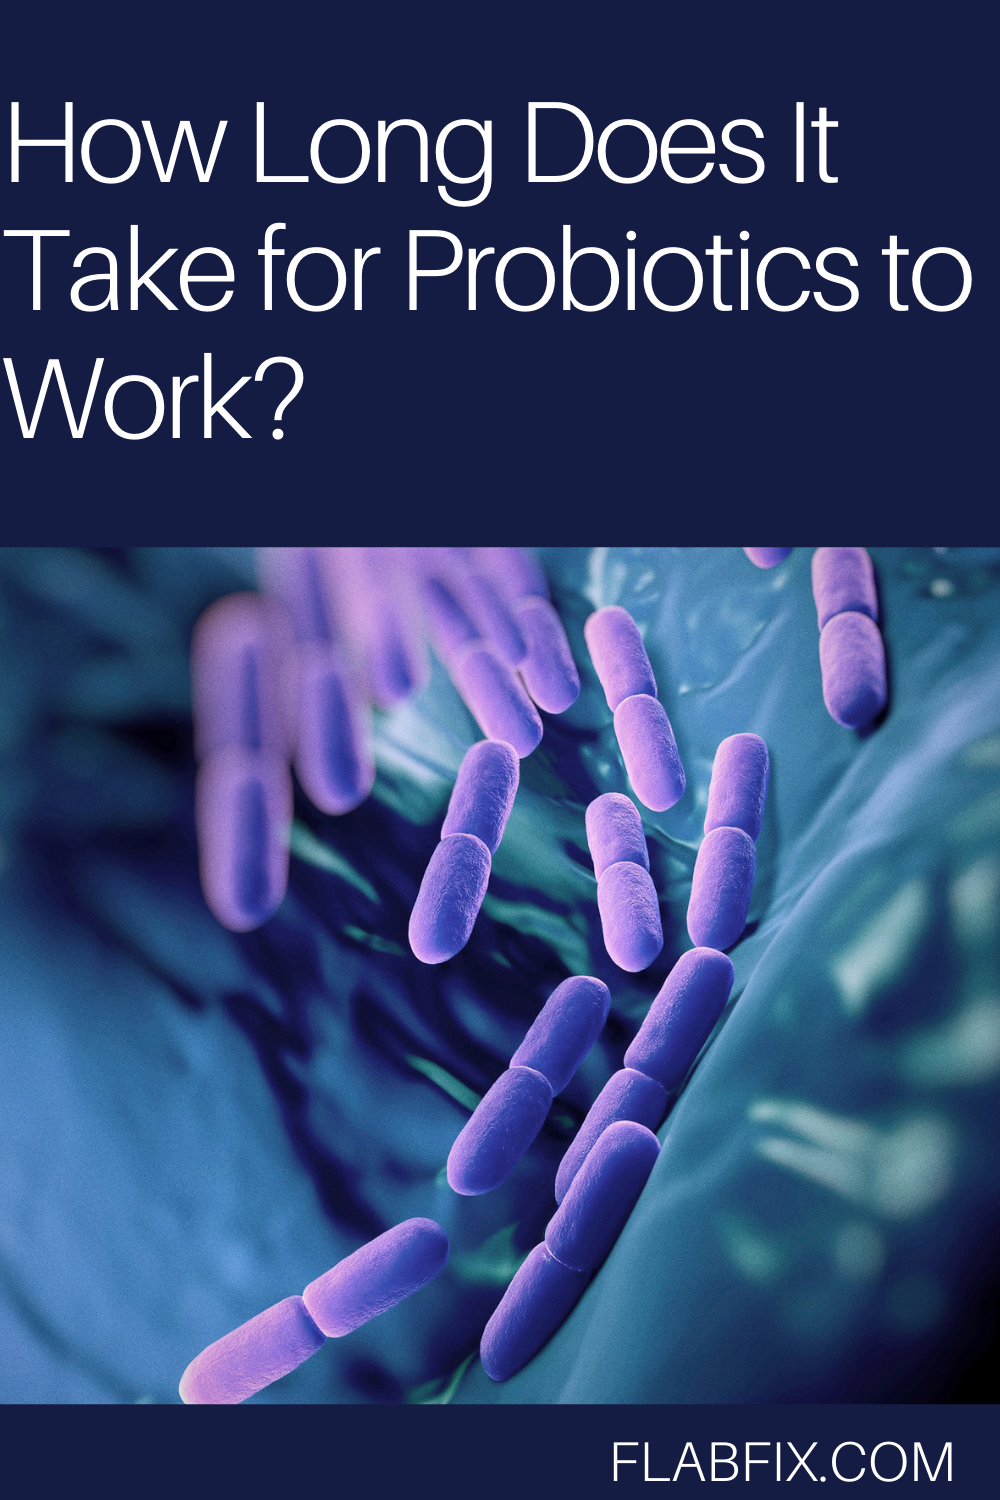 How Long Does It Take for Probiotics to Work?